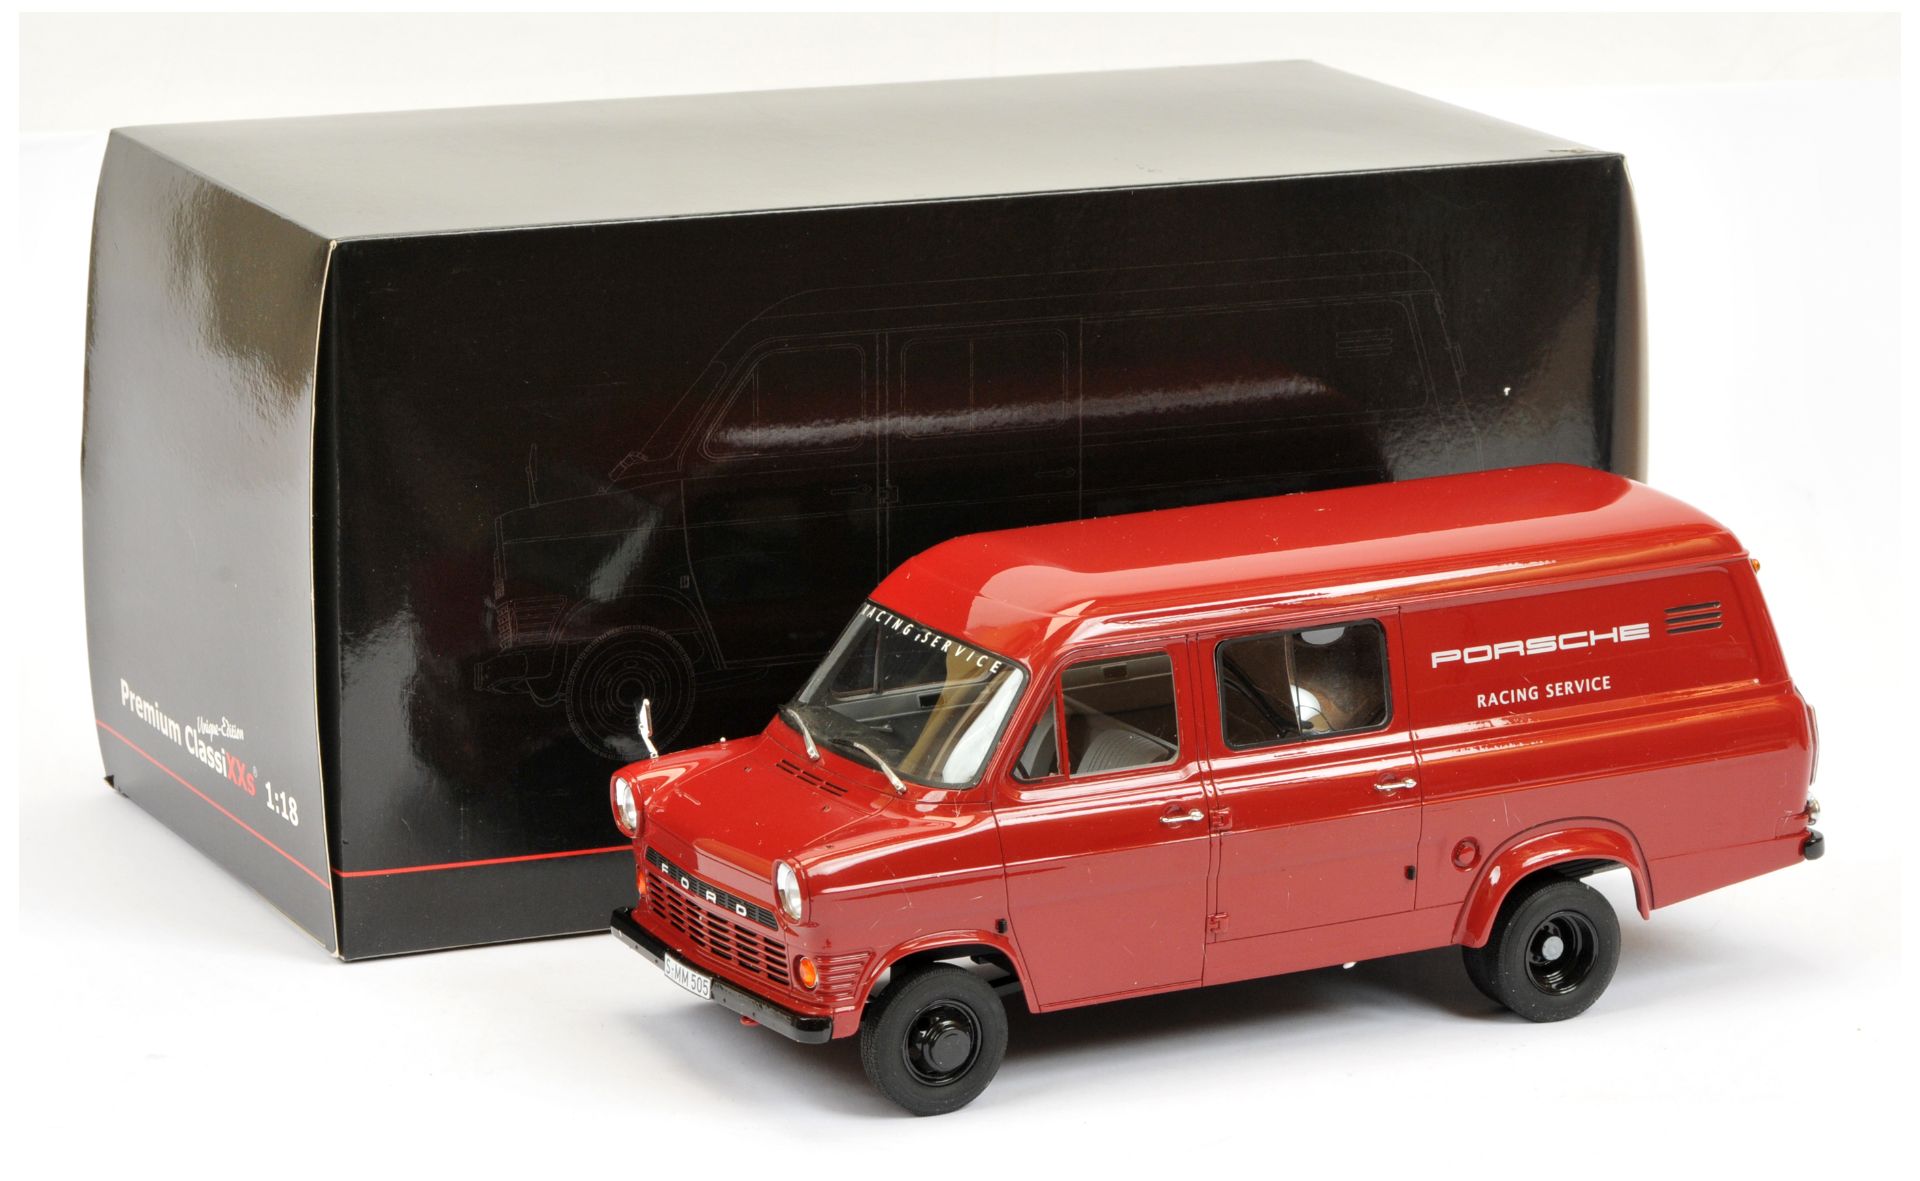 Premium Classixxs 30060 1/18th scale Ford Transit MKI "Porsche Racing Service" - red, limited to ...